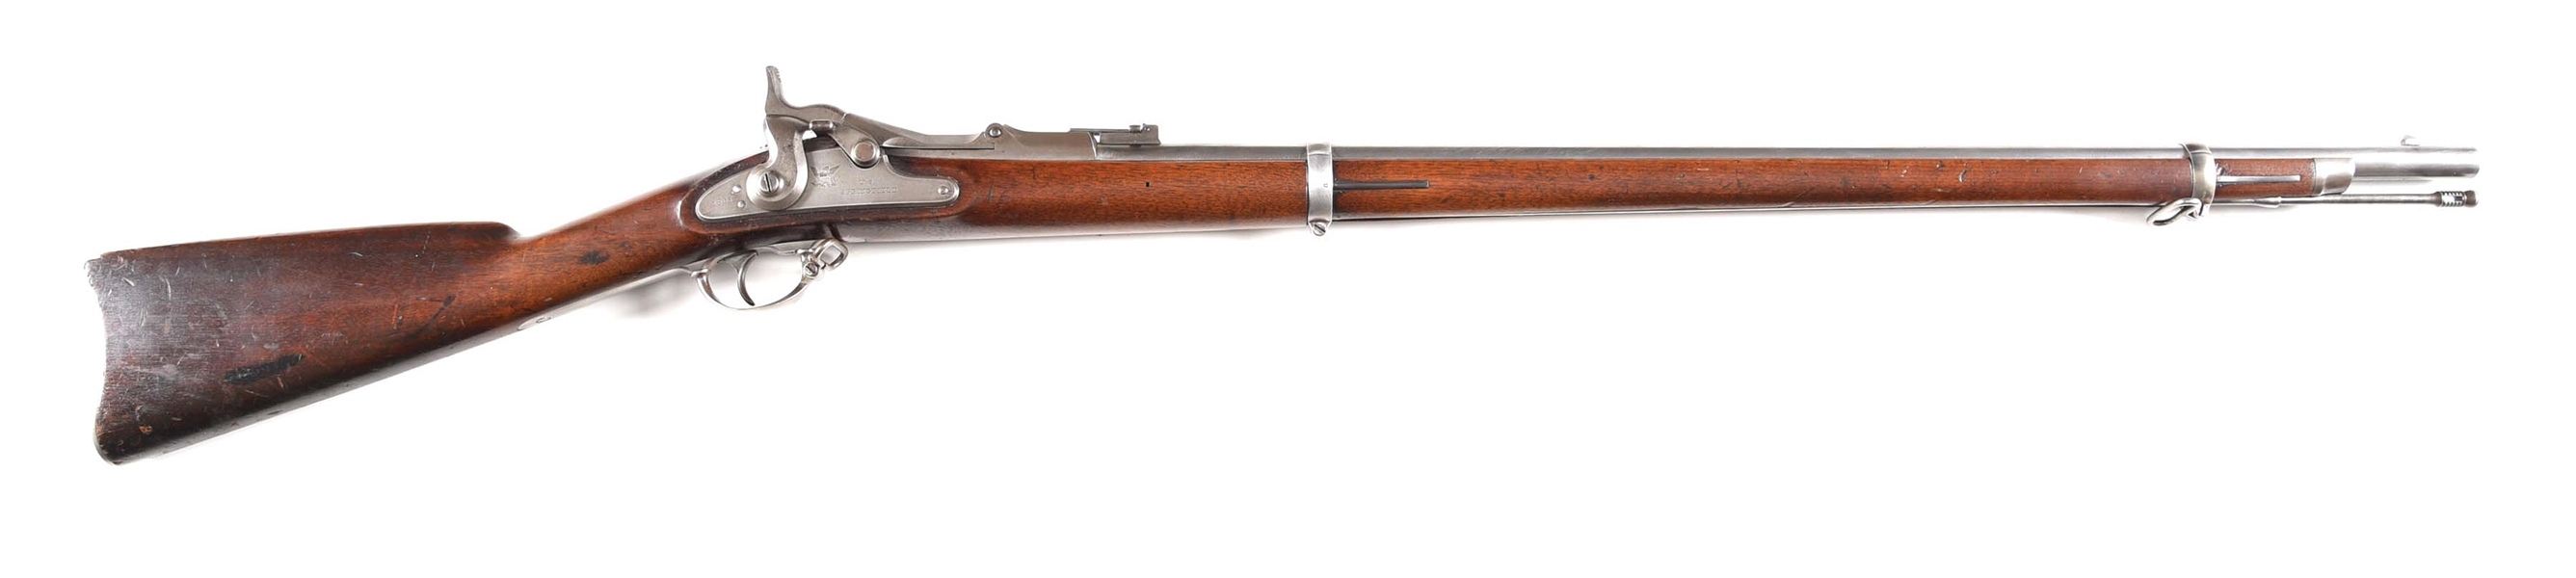 (A) US SPRINGFIELD MODEL 1868 TRAPDOOR RIFLE DATED 1869.